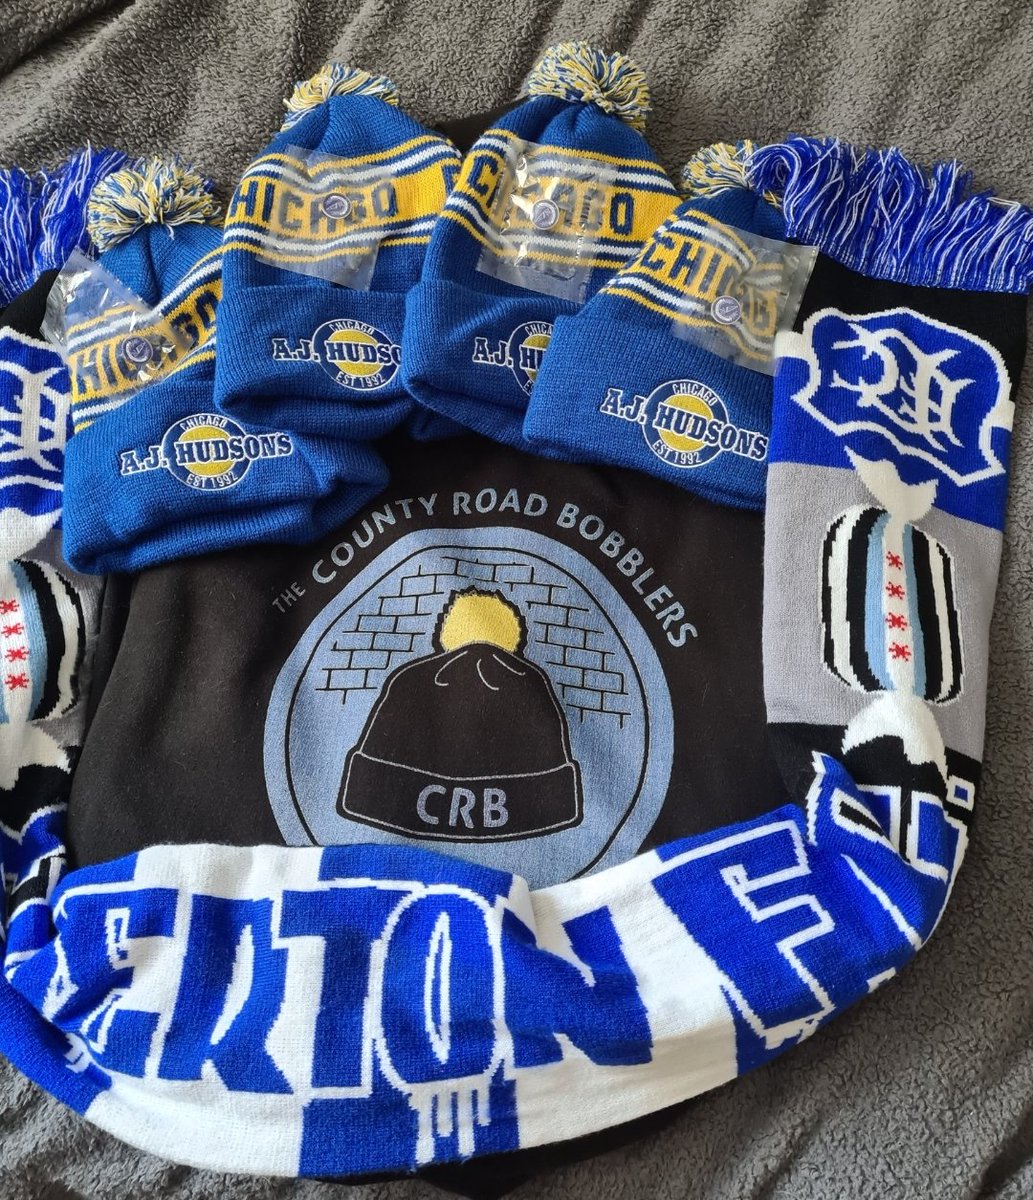 Huge thank you to @EvertonChicago  @AJHudsons for the great bobblehats we'll wear them with great pride.

Near or Far the #BlueFamily is one. We have created amazing friendships with blues from 🇺🇲 @EvertonInUSA we hope to see you all soon again.

Bobblers 🤝 Chicago Blues 
🔵⚪💙